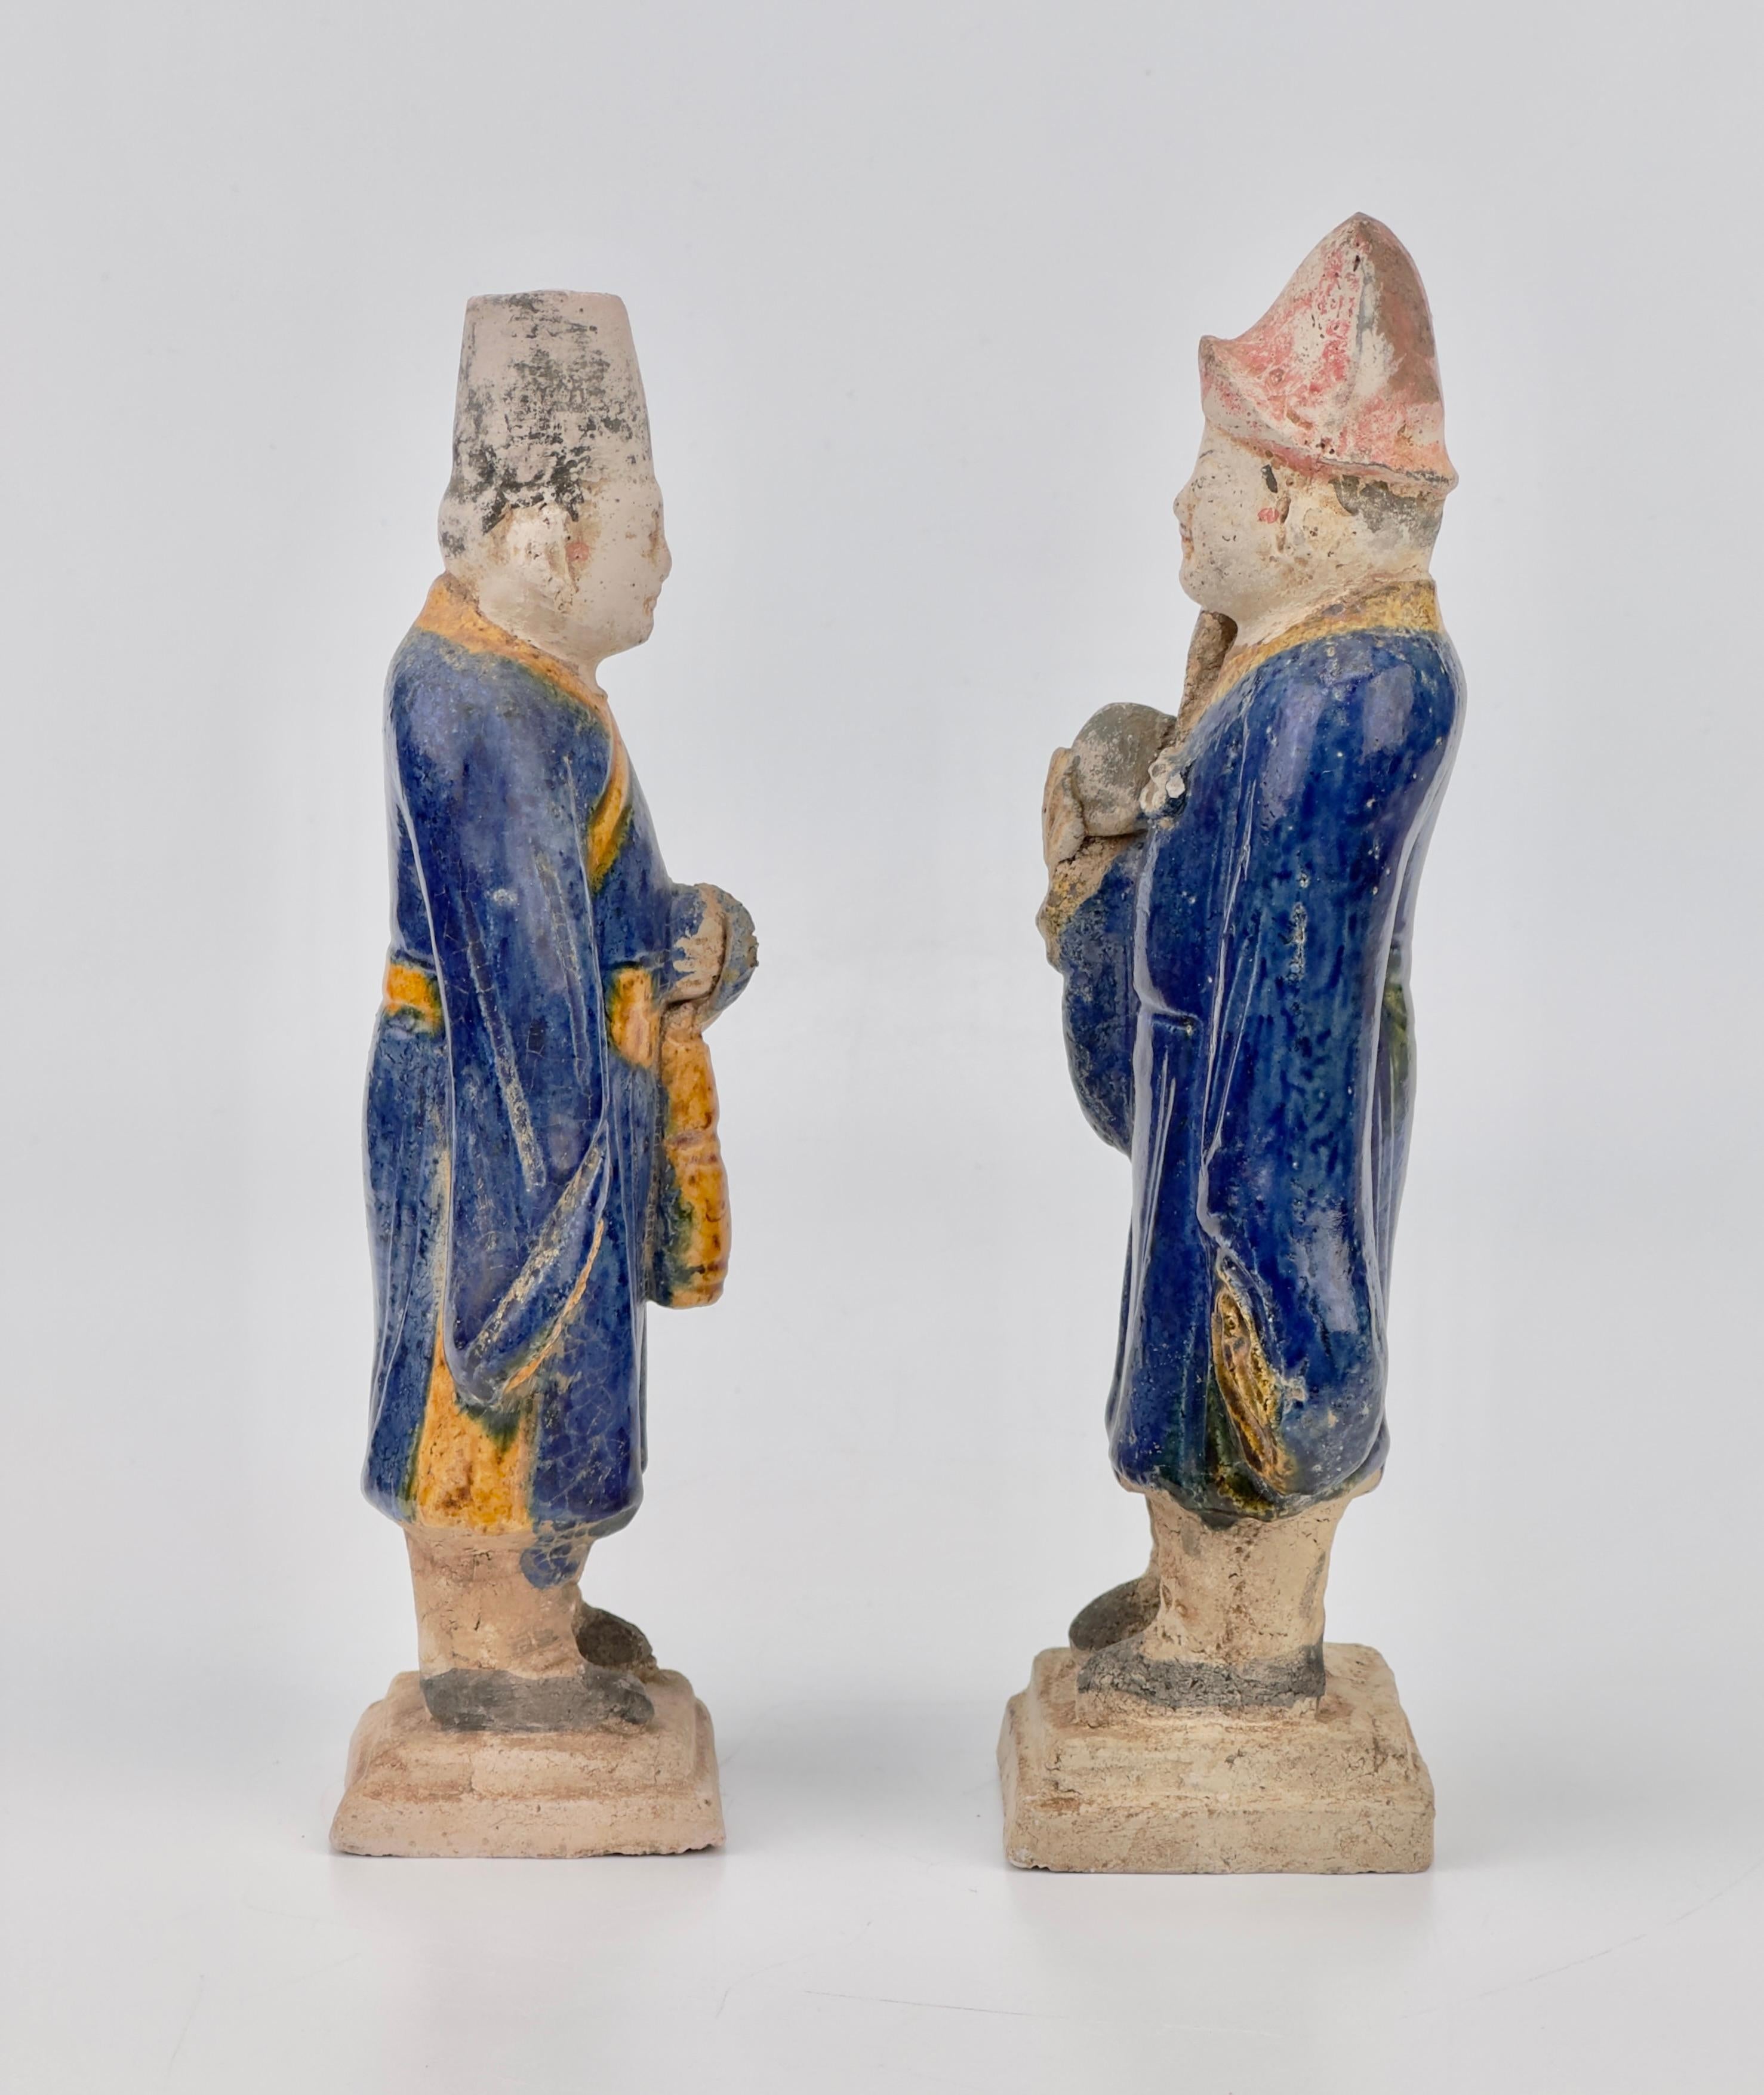 Statues of Chinese dignitaries crafted from terracotta, featuring glazes in blue and ocher, are set on rectangular bases. The wide-sleeved robes and craftsmanship, along with the cylindrical hats, indicate their origin, specifically from the Ming